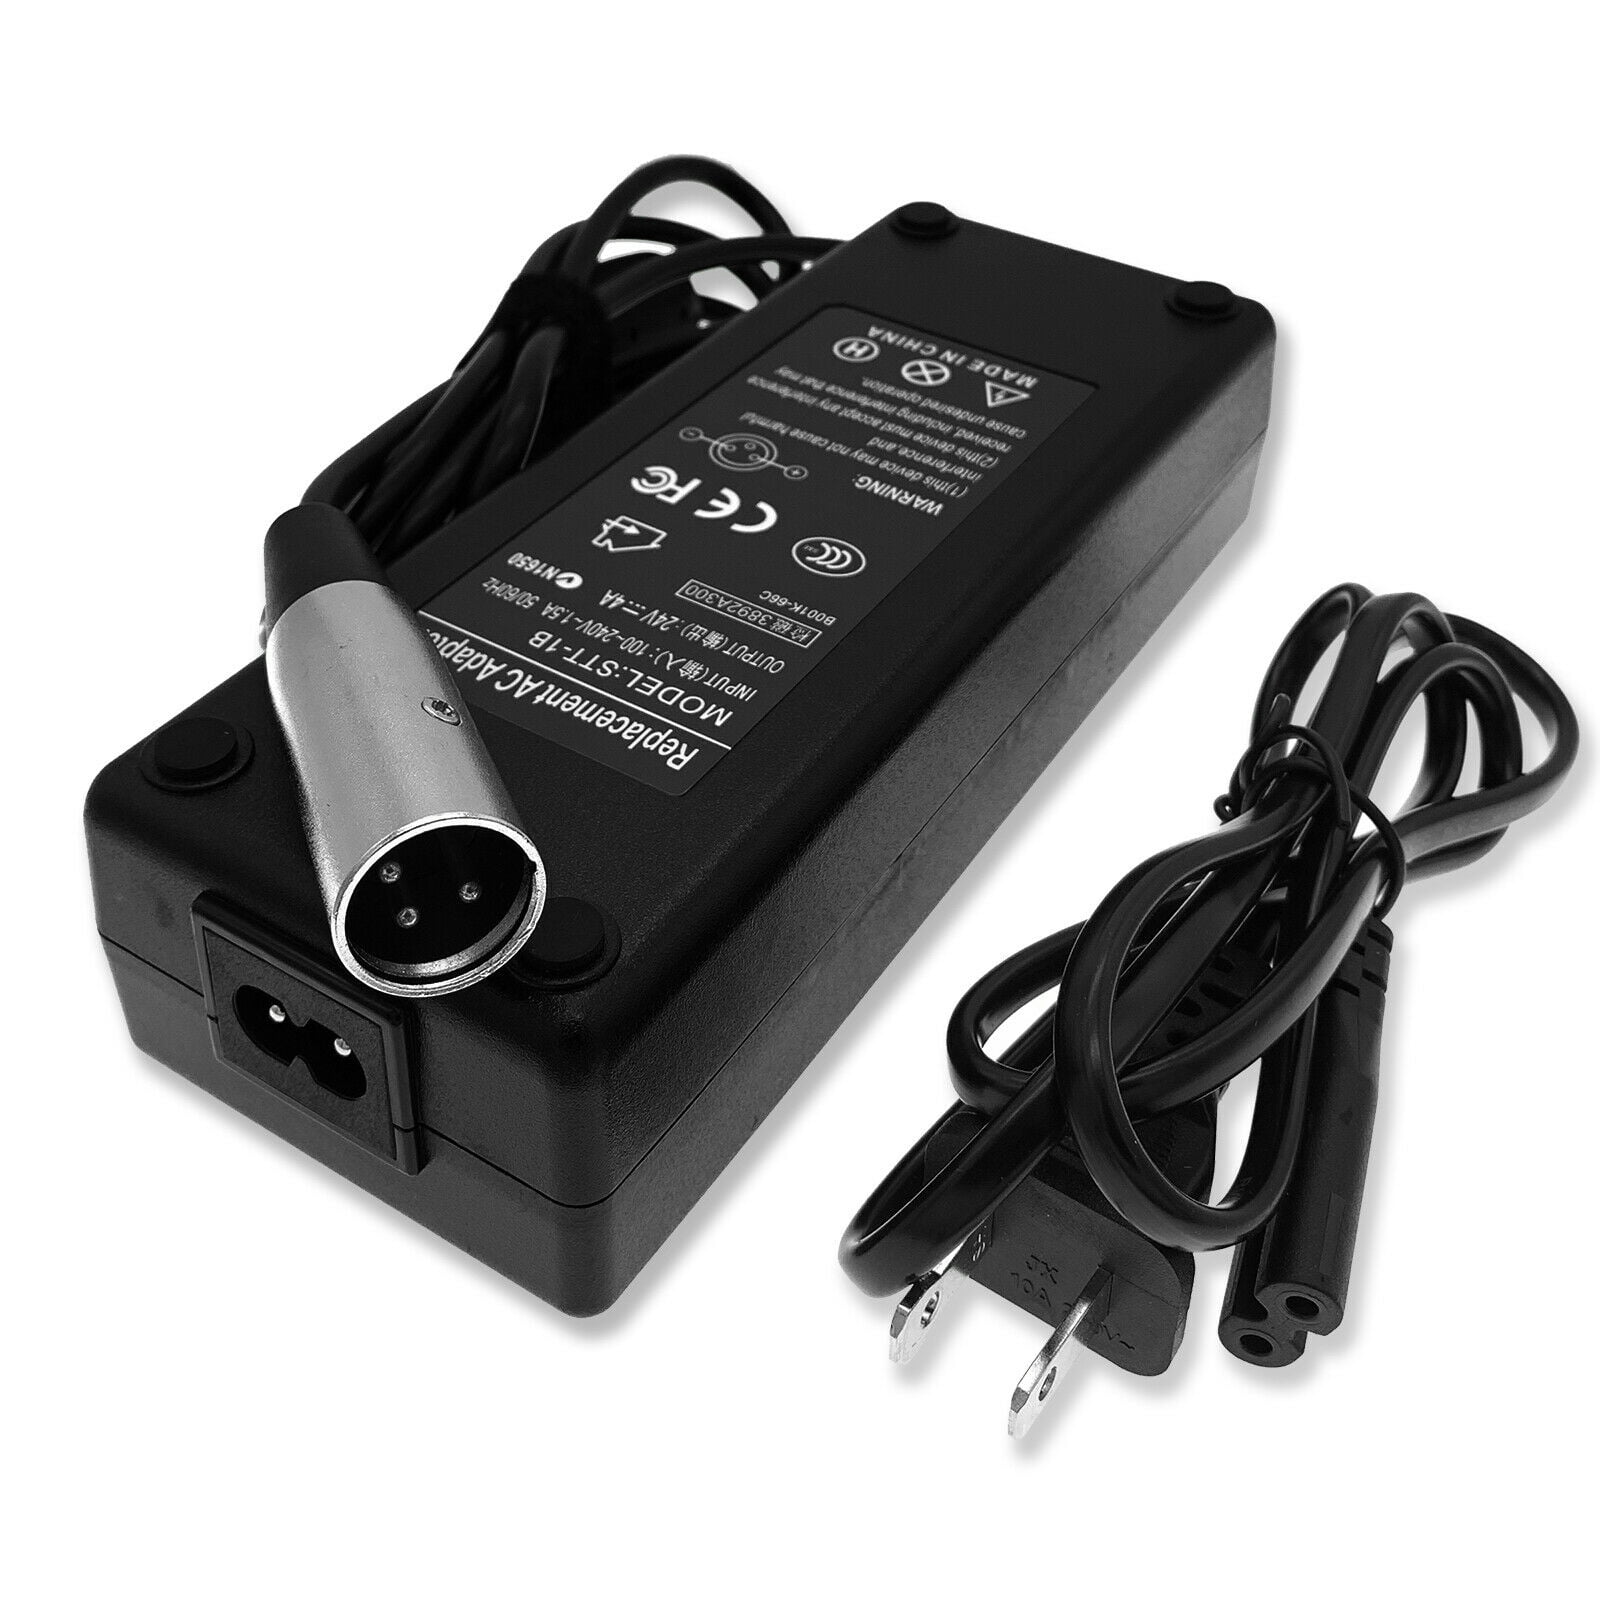 New 24V 4A 96W Electric Scooter Battery Charger For Hoveround mpv5 Chair Currie 